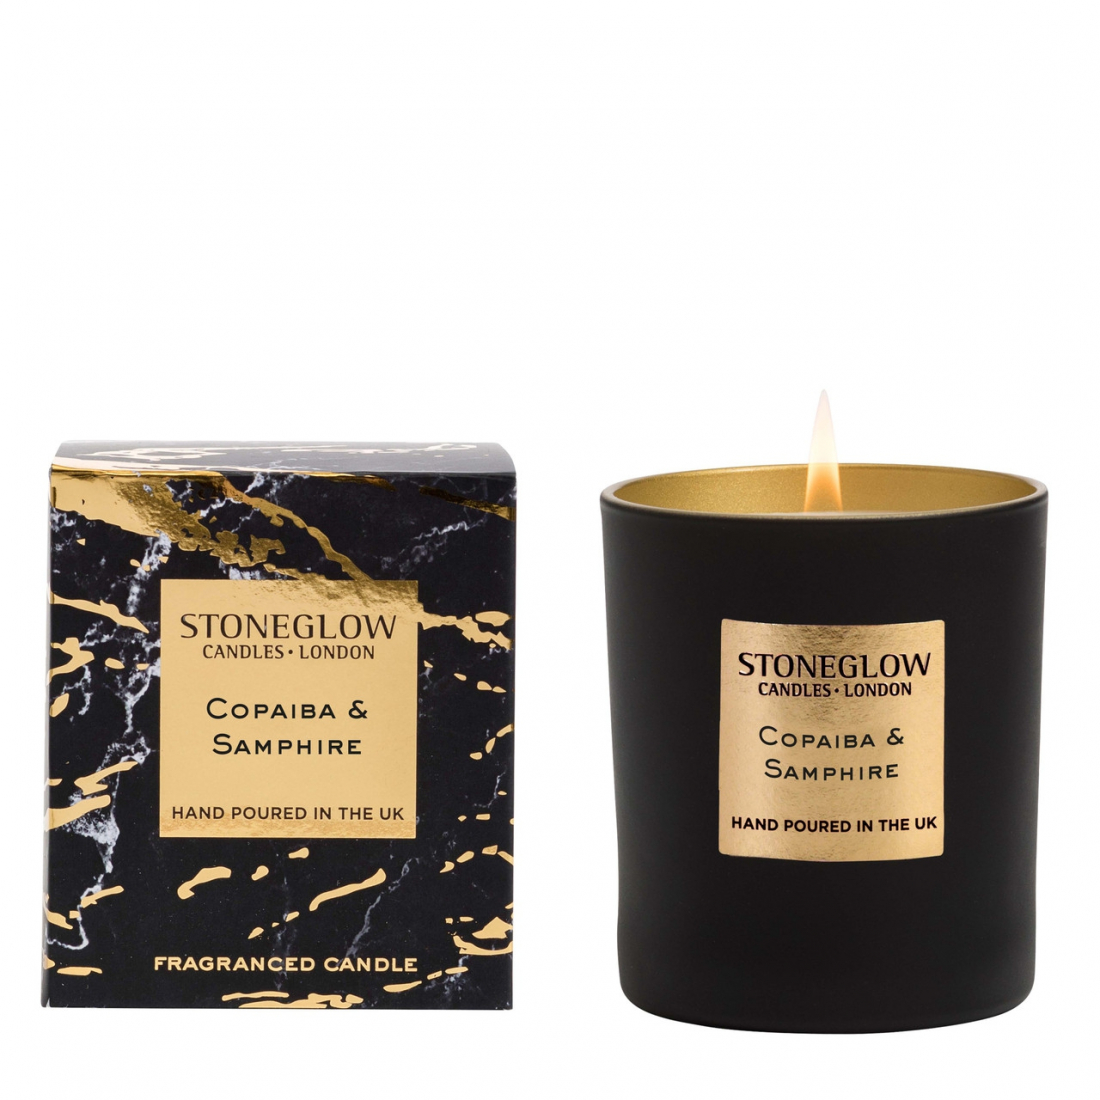 'Copaiba & Samphire' Scented Candle - 220 g